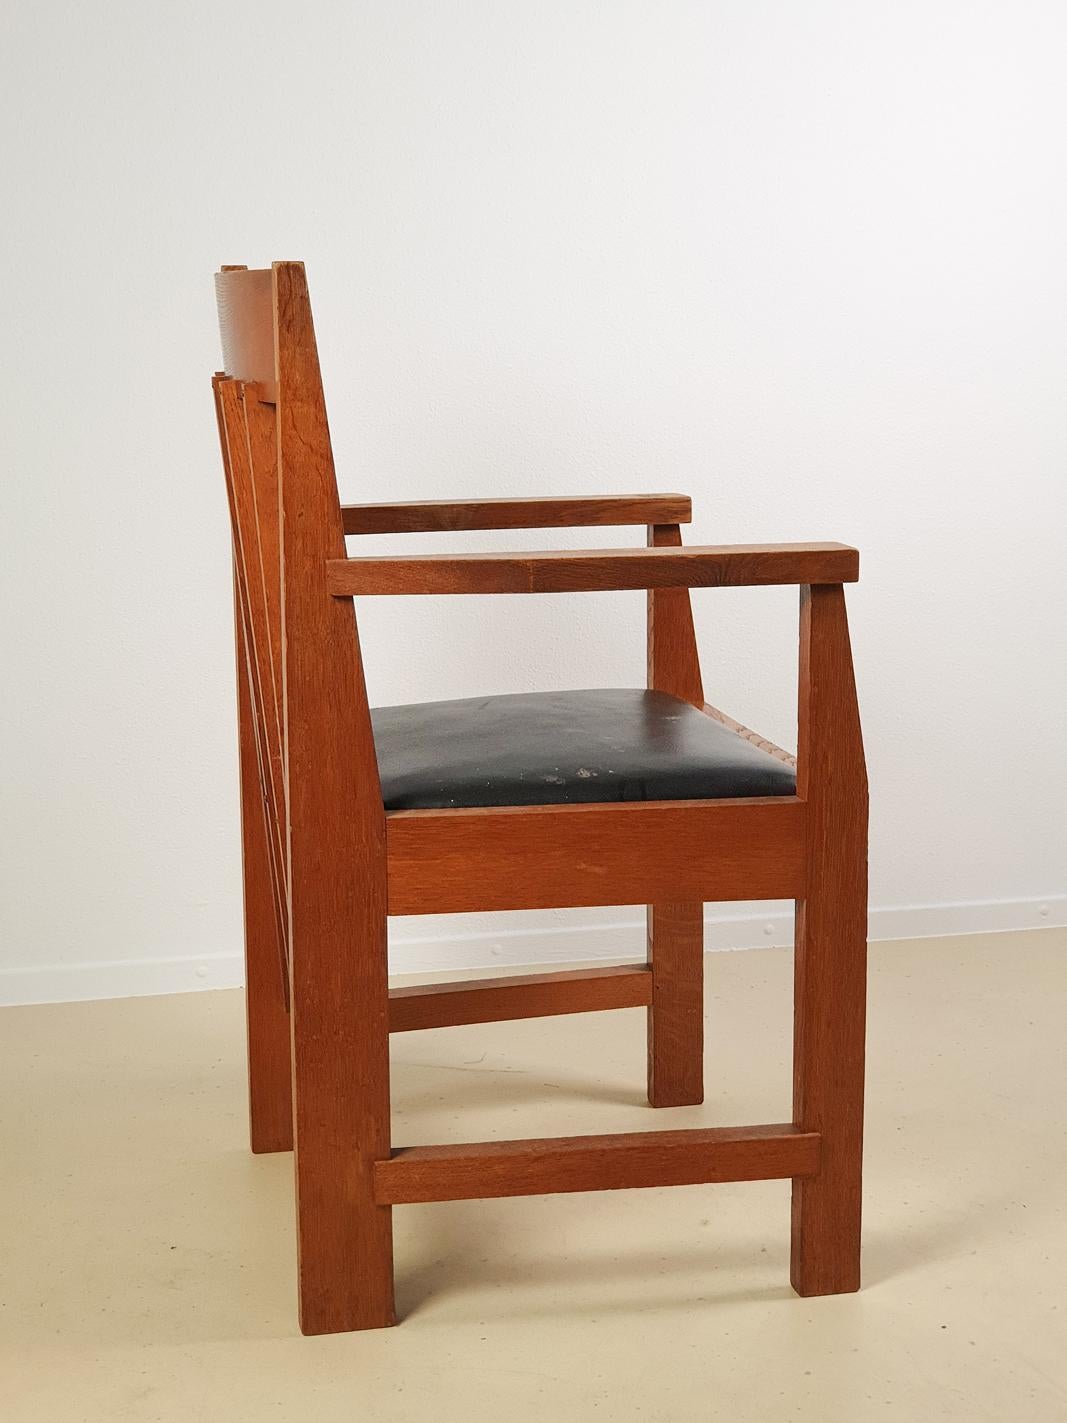 Early 20th century Dutch design chair
Modernist and Minimalist piece from the Art Deco era.

The Hague School is a group of artists who lived and worked in The Hague between 1860 and 1890. Their work was heavily influenced by the realist painters